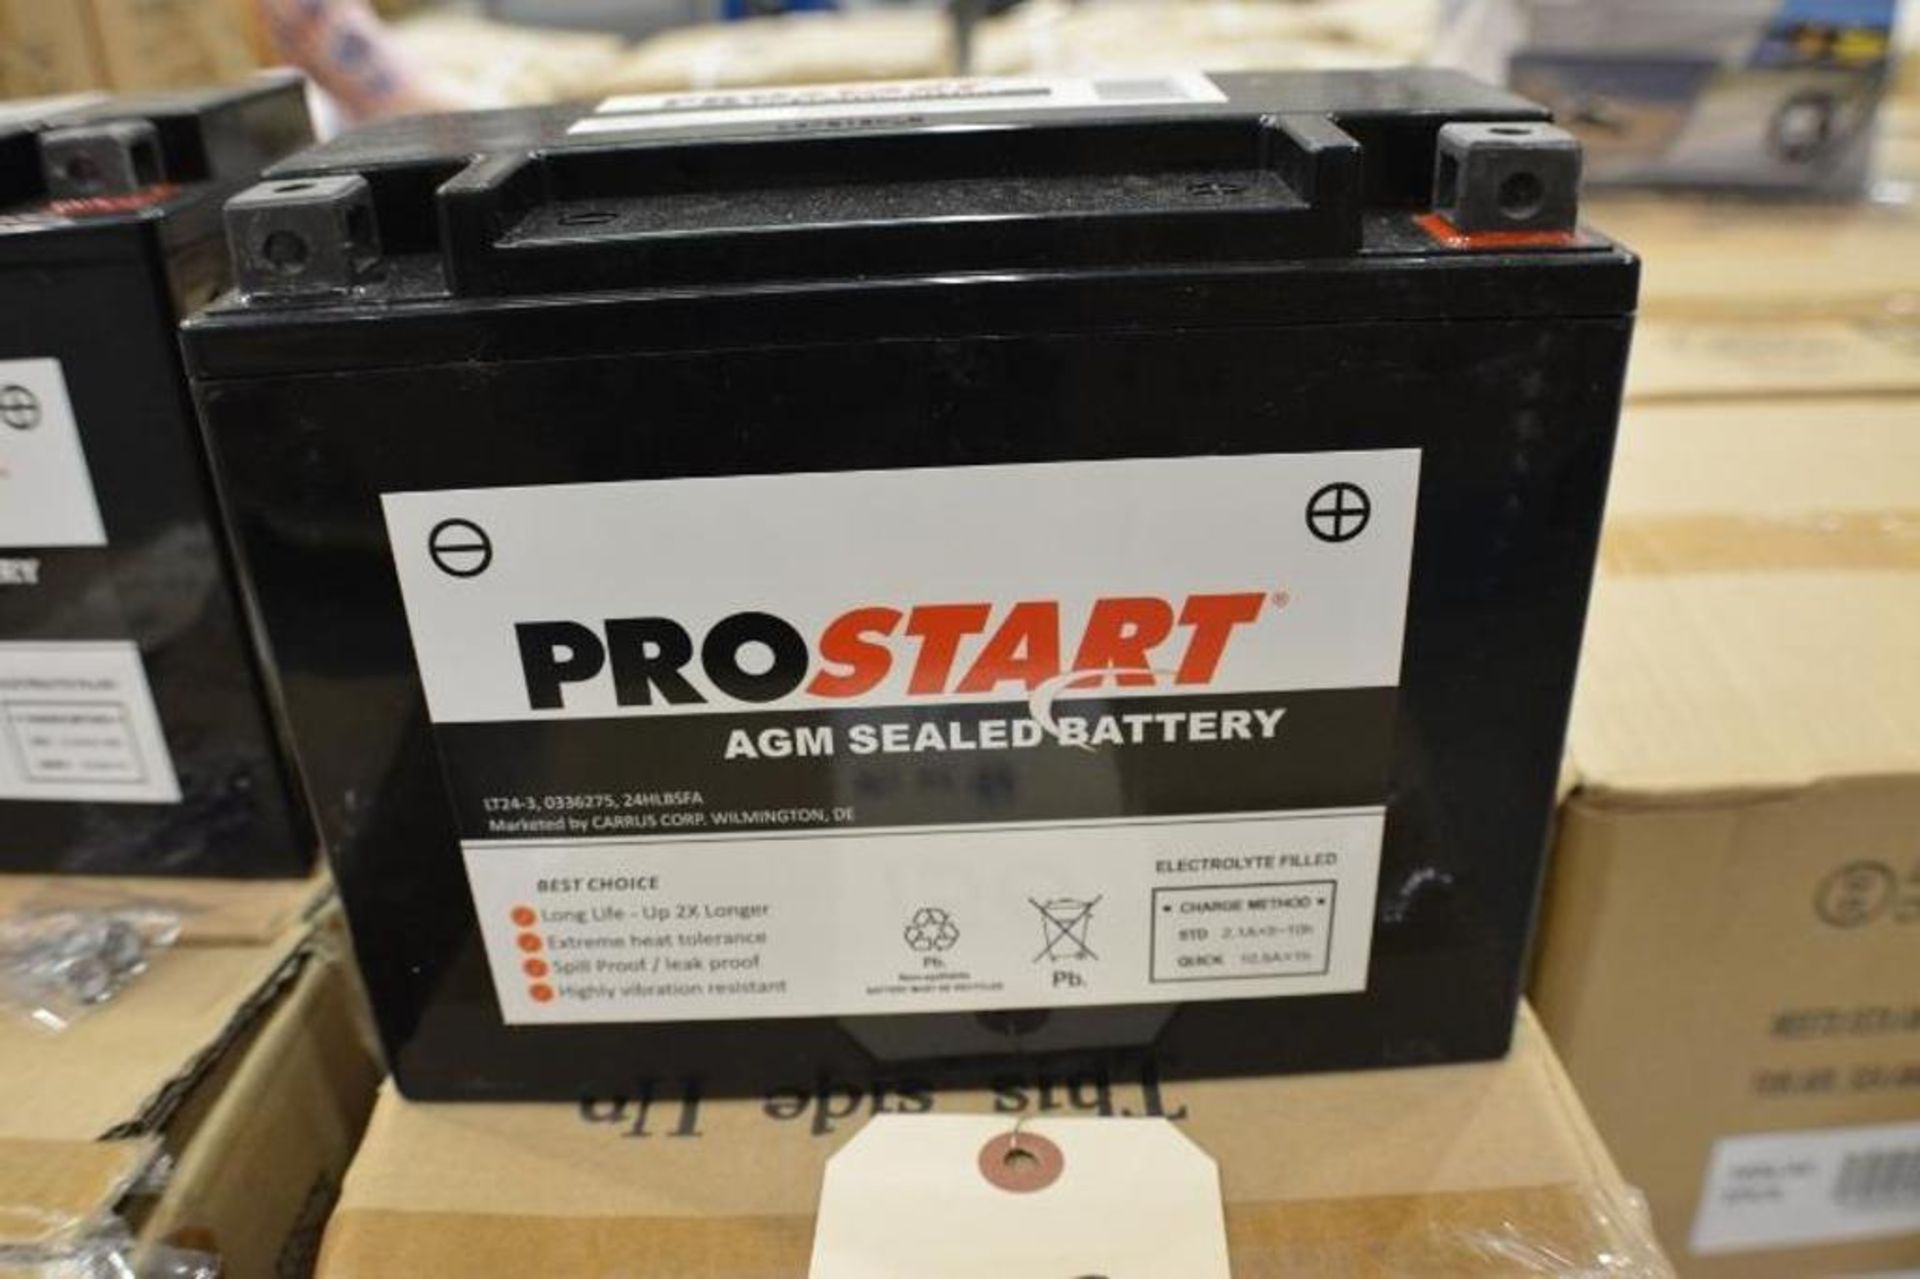 Battery LT24.3 for Motorcycles/ATV/Jet Skis/Lawn Garden/ Scooters by Prostart. Qty. 10 x $ - Image 2 of 3